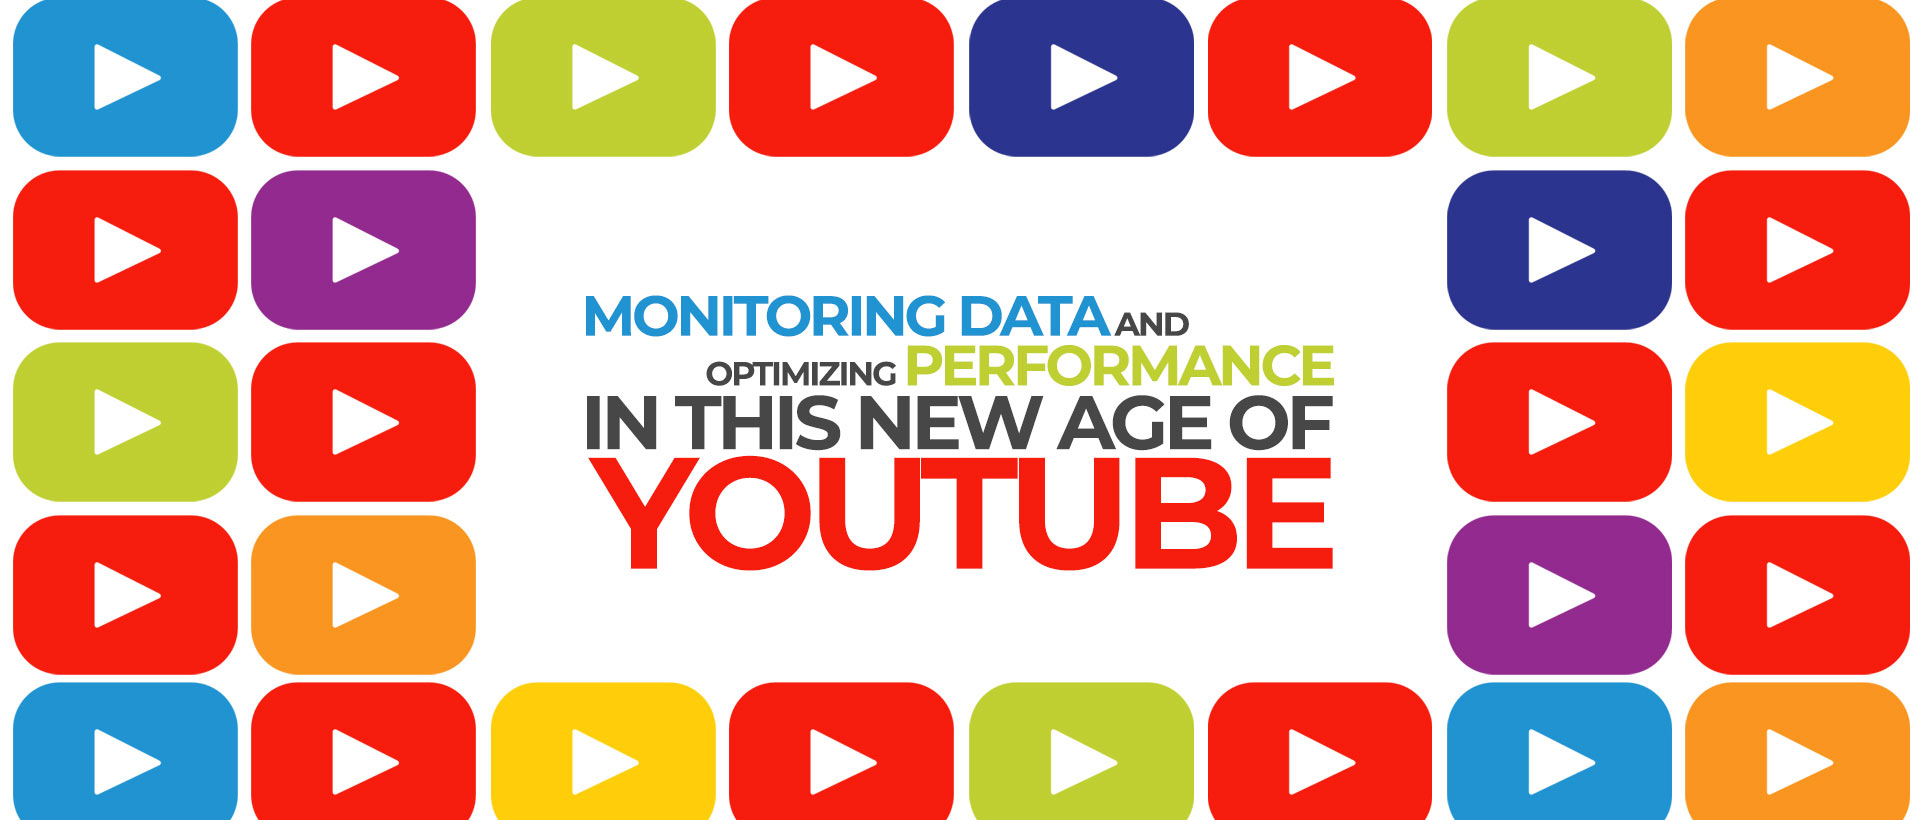 Monitoring Data and Optimizing Performance in this New Age of YouTube